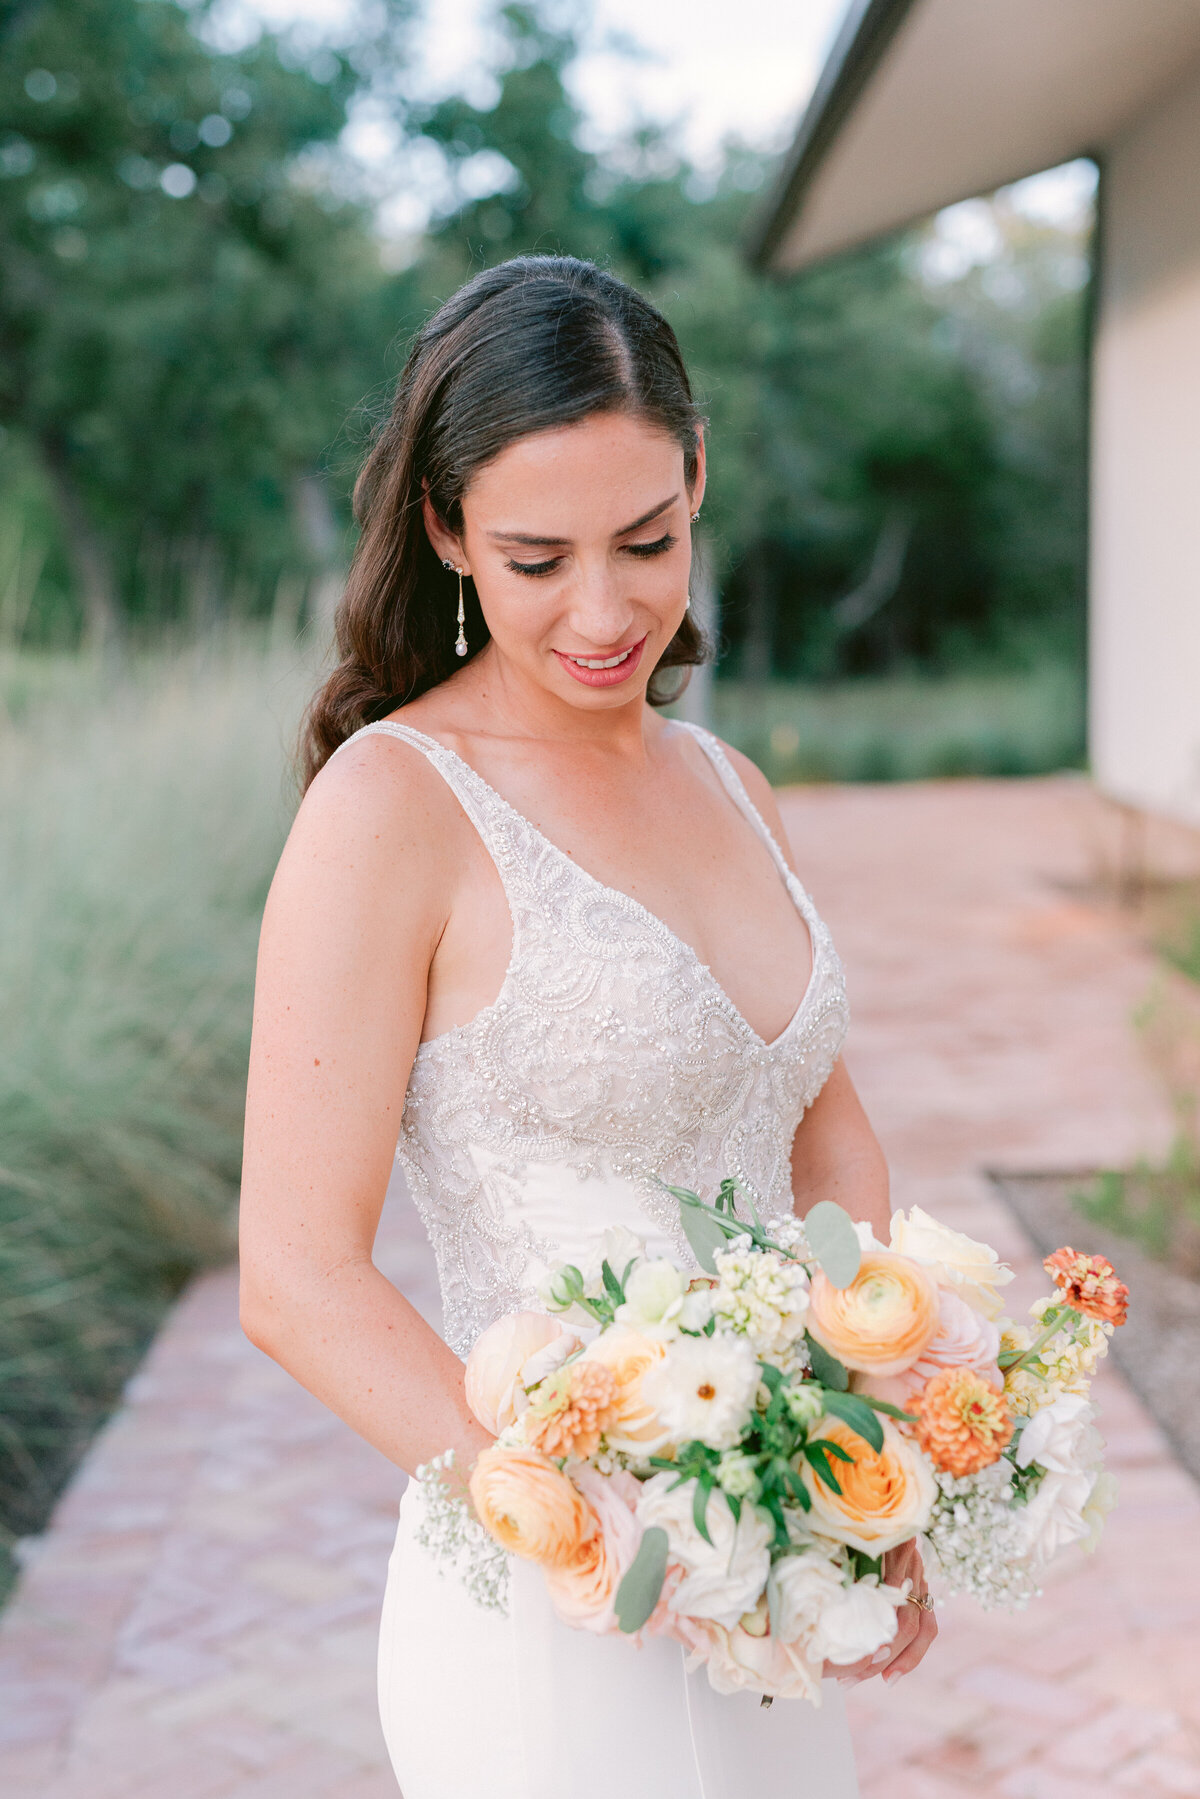 Bridal portraits of bride holding bouquet of white and peach florals in the grounds of The Grand Lady Austin